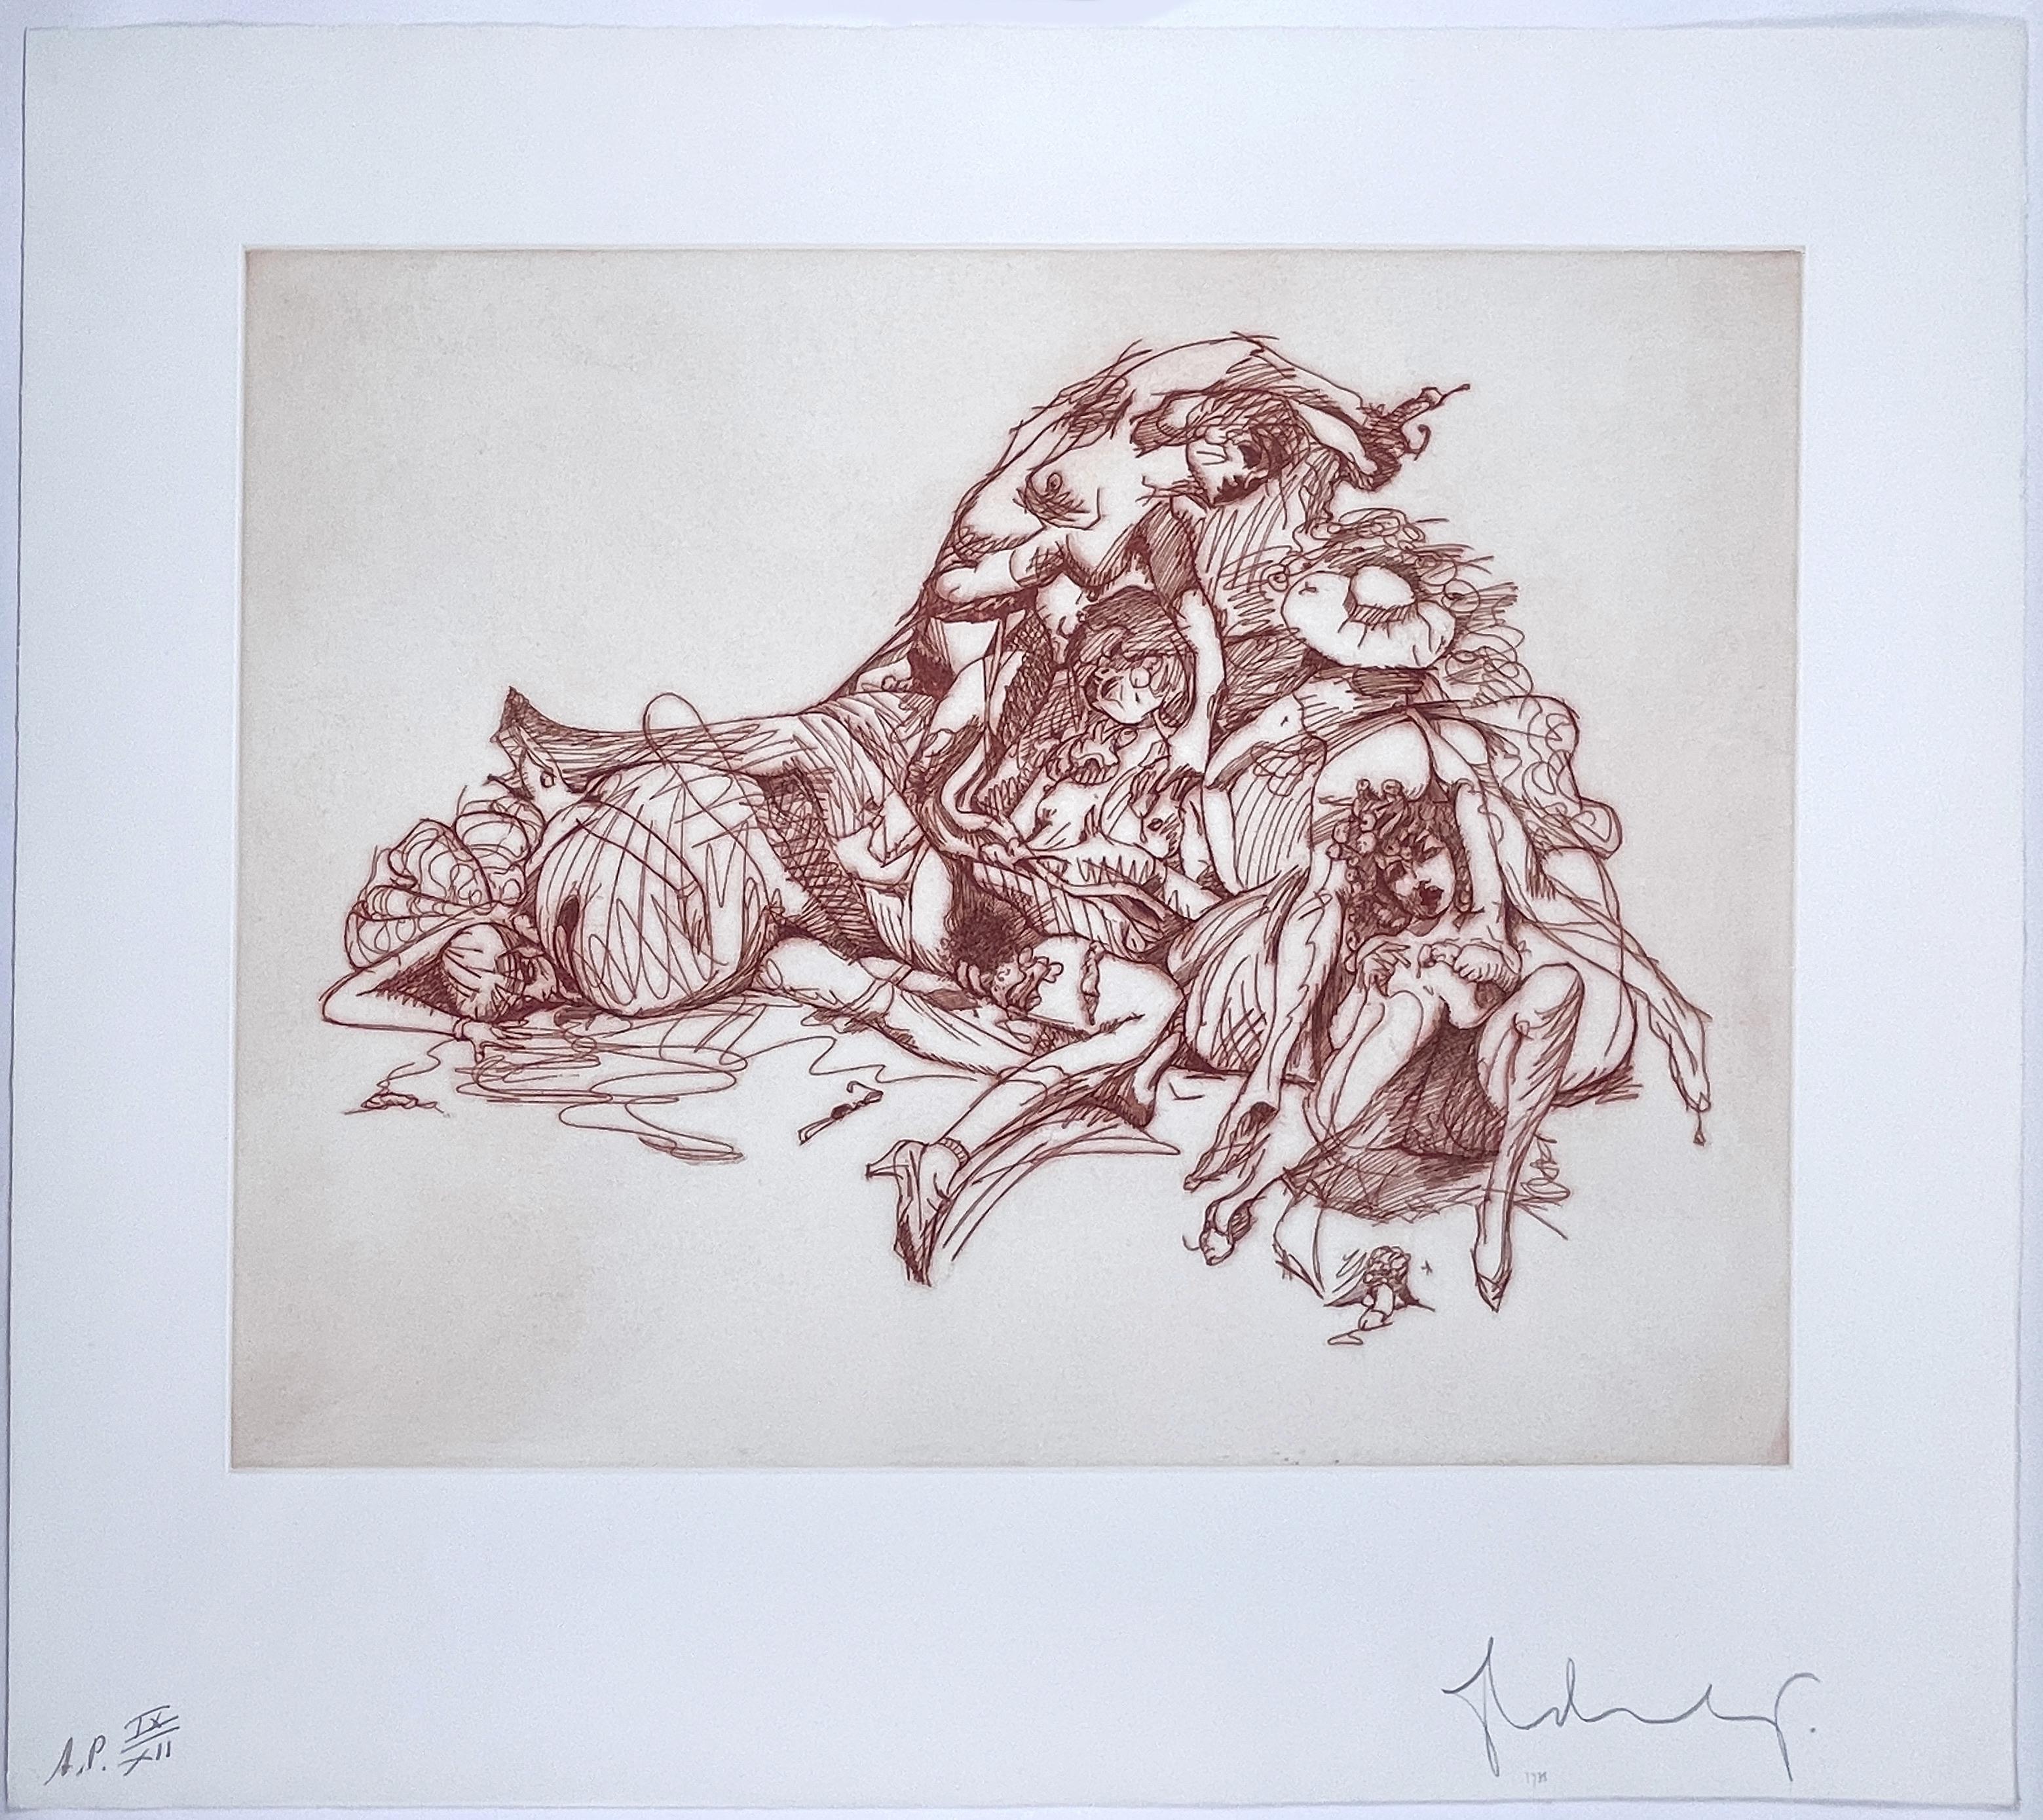 Study for a Monument in the Heroic/Erotic/Academic/Comic Style Claes Oldenburg For Sale 7